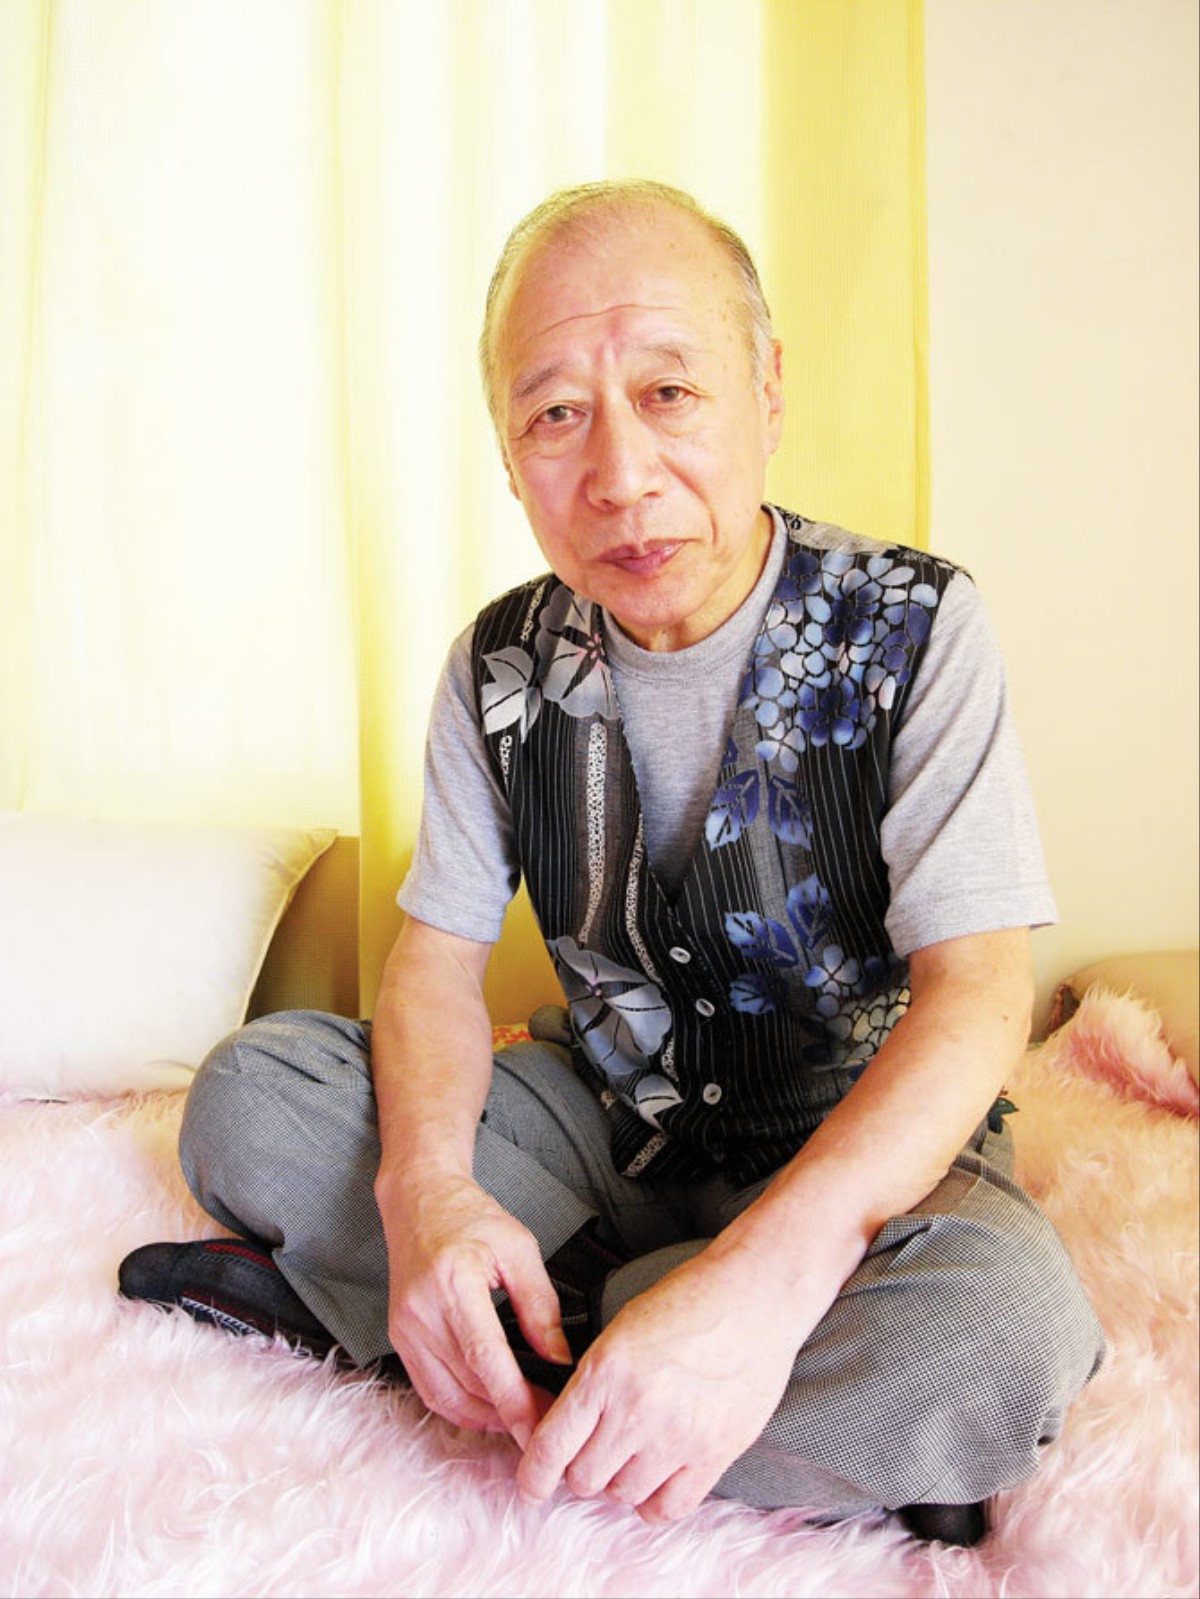 A 74-year-old Japanese Porn Star - VICE